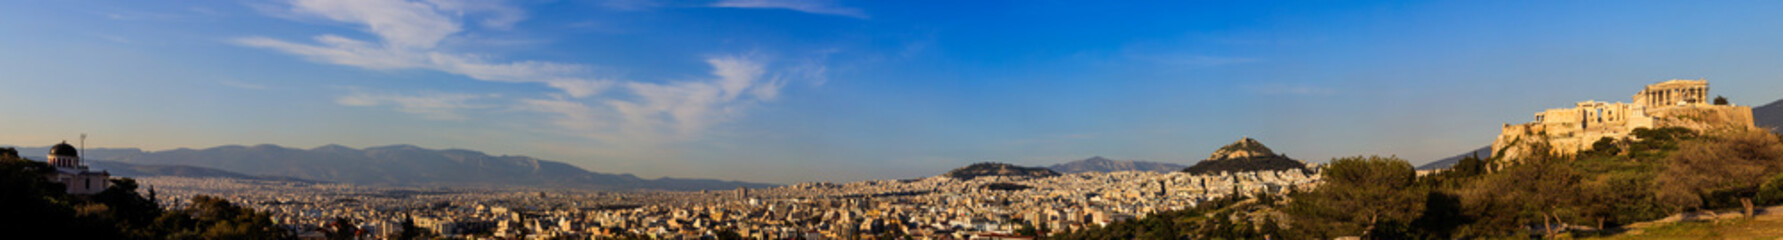 Panoramic view of Acropolis and Lycabettus - Athens, Greece